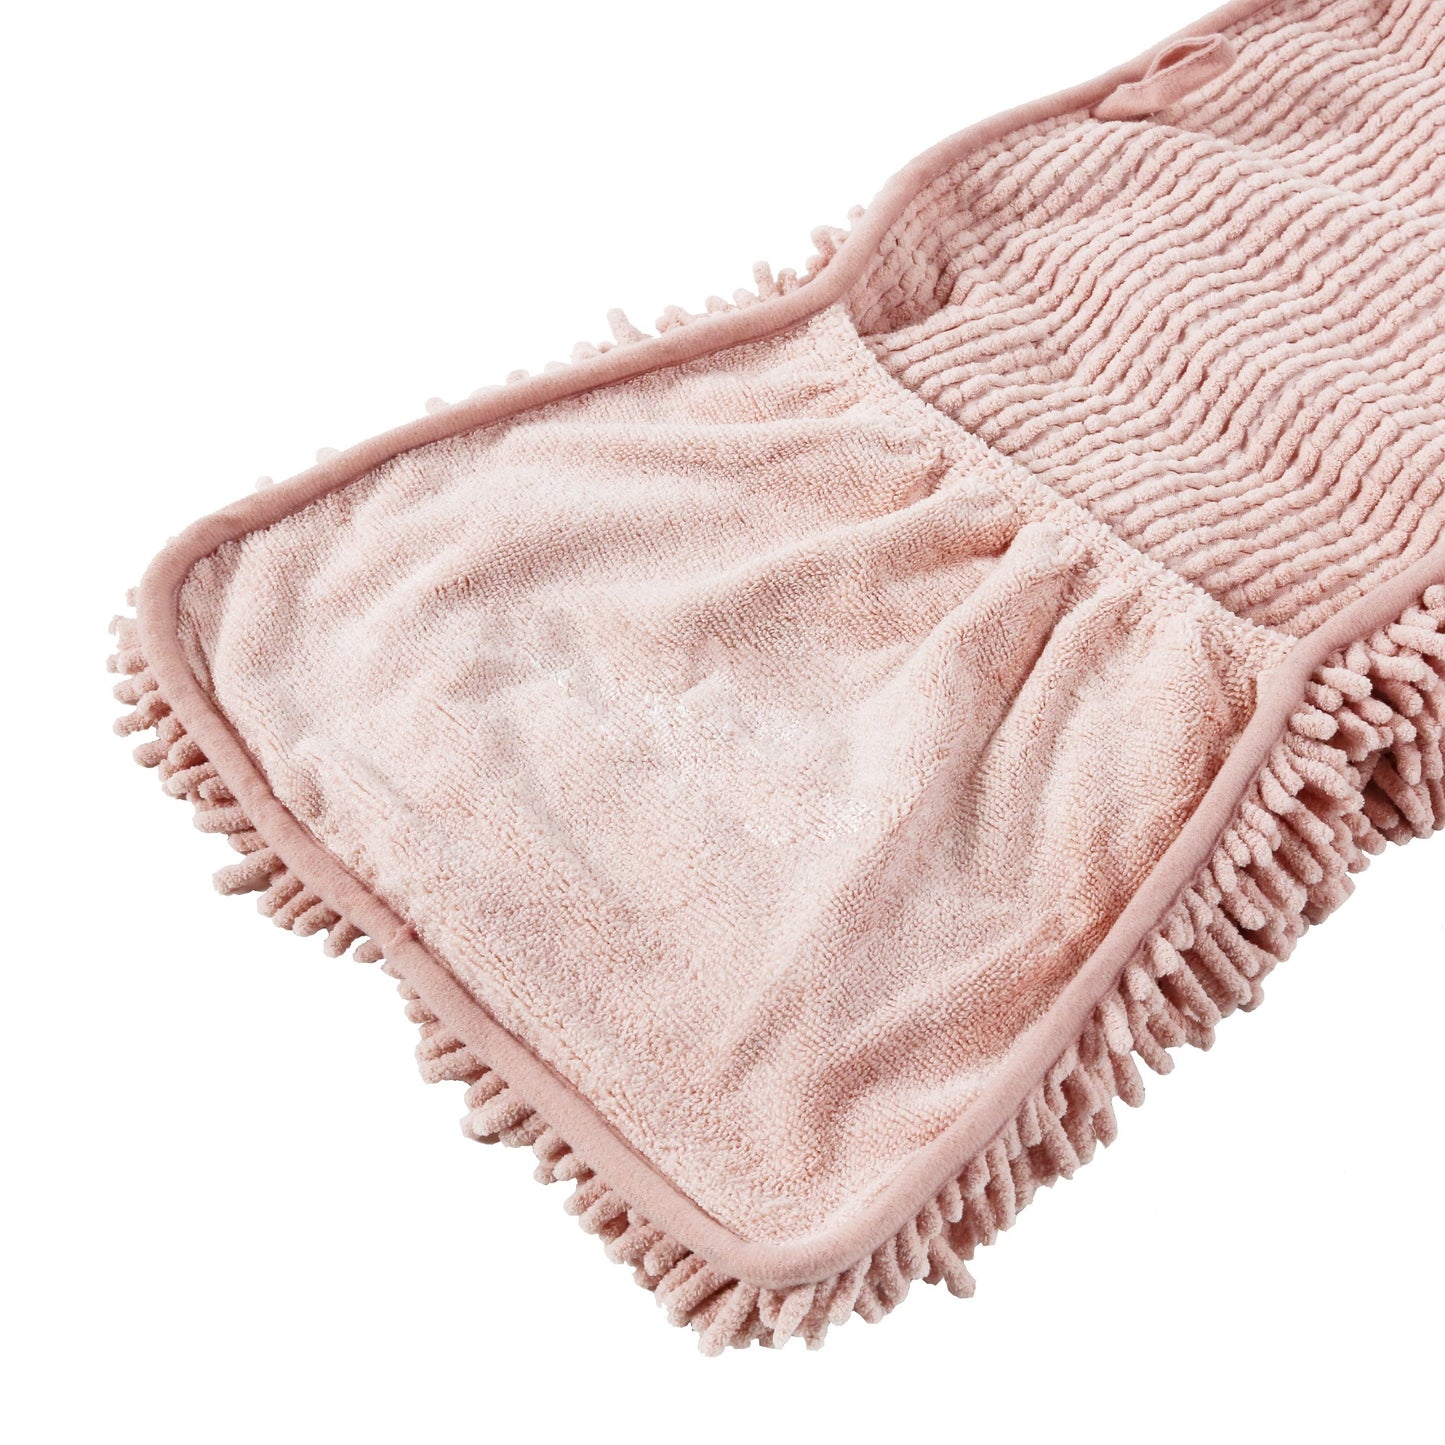 Absorbent Dog Towel, Extra Large (35"x15") Quick Drying Dog Bath Towel with Hand Pockets, Microfiber Shammy Pet Towel for Dog and Cat, Machine Washable (Pink)